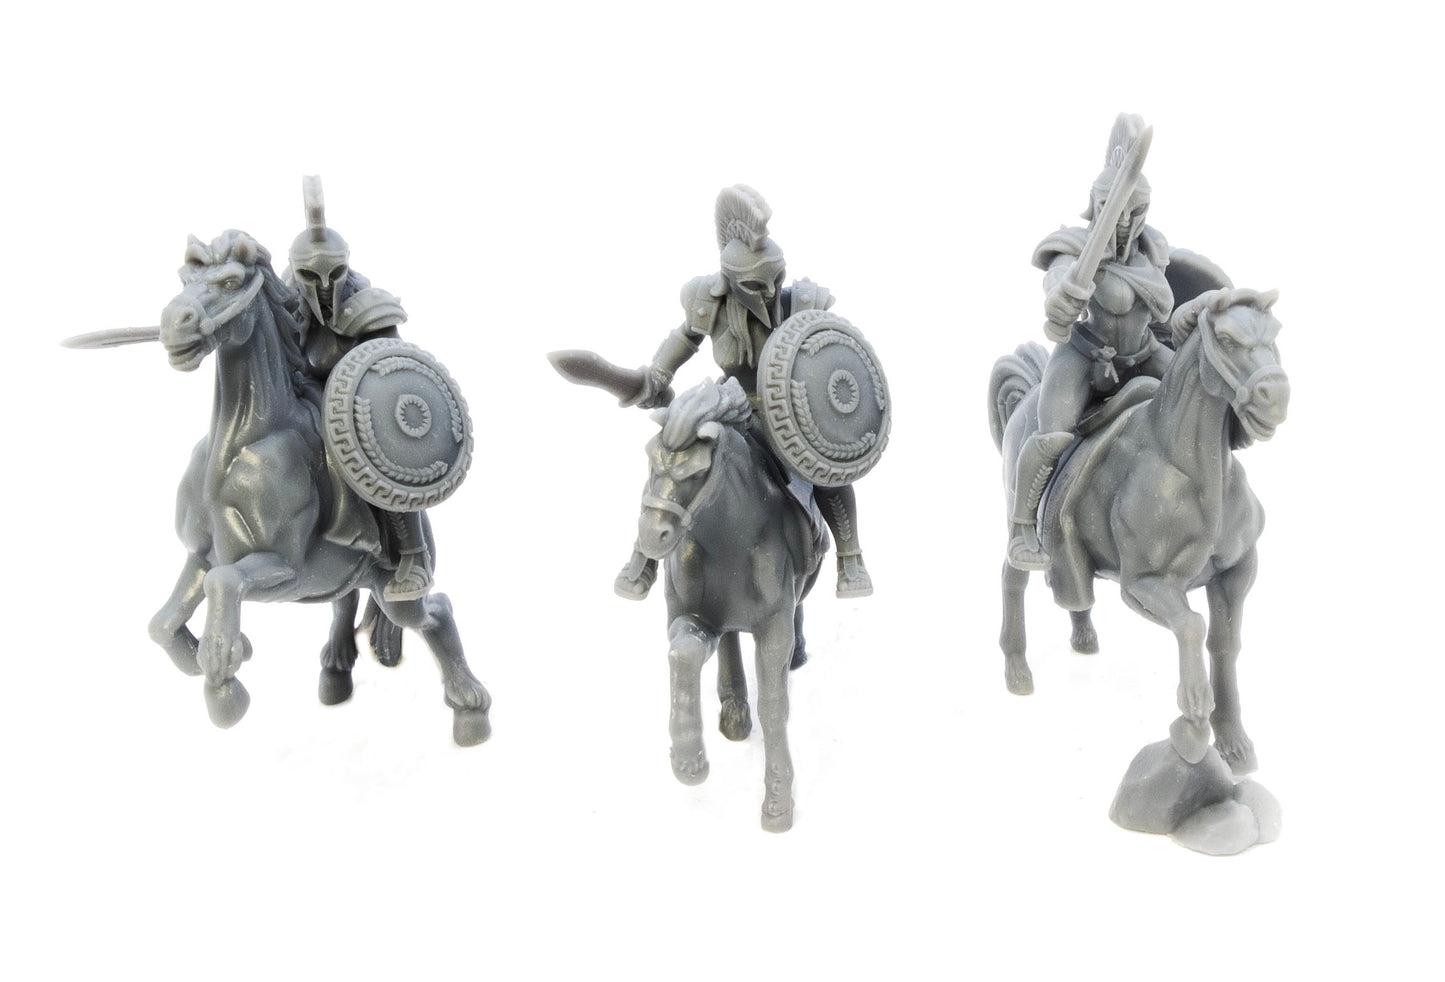 Spartan Cavalry with helmets and swords